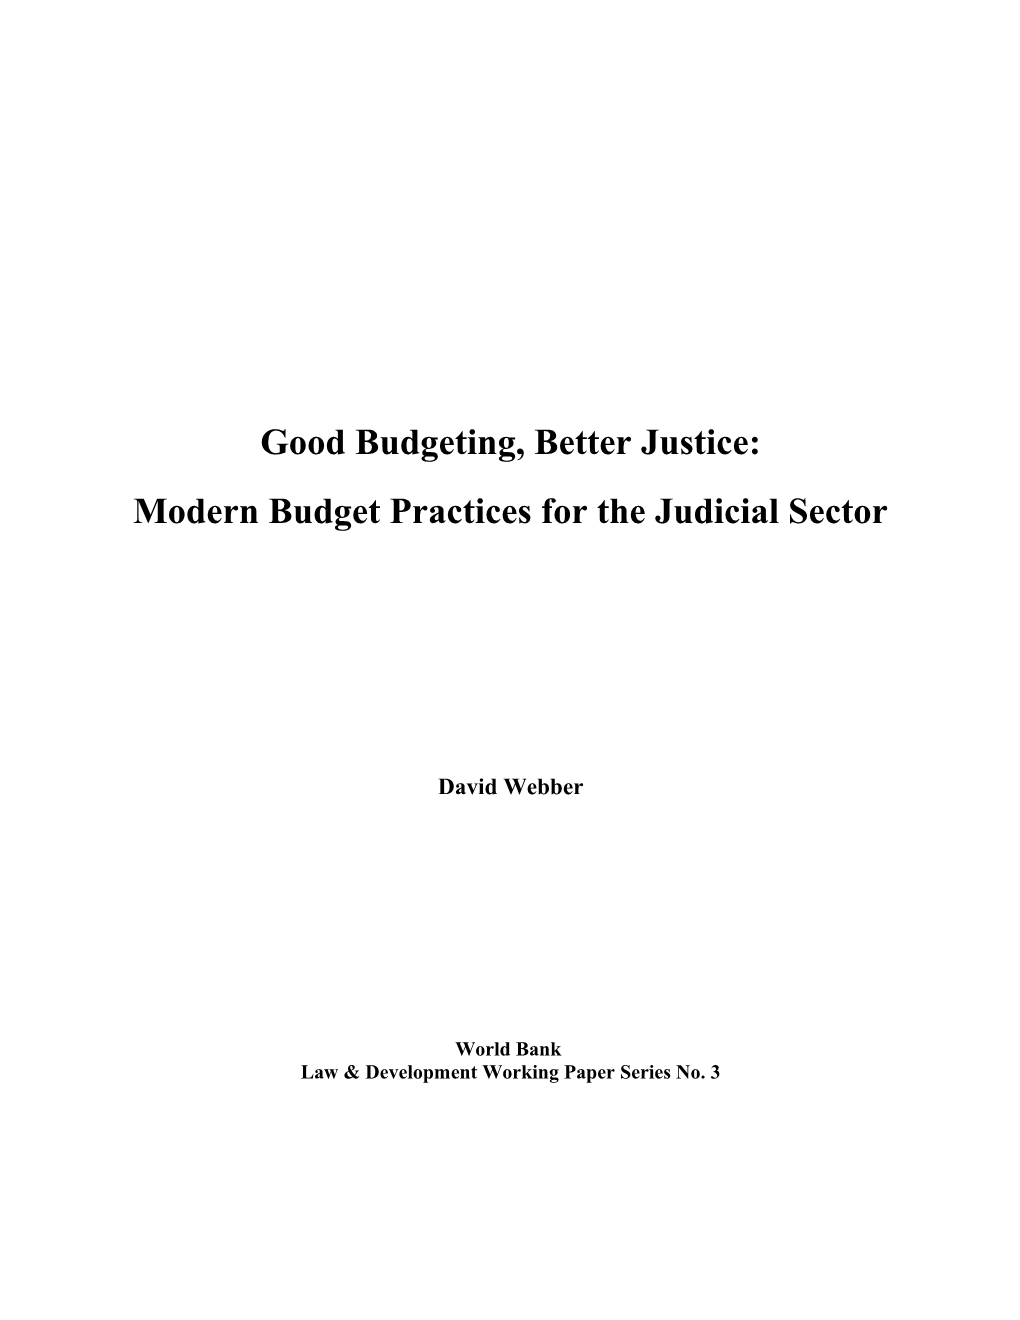 Good Budgeting, Better Justice